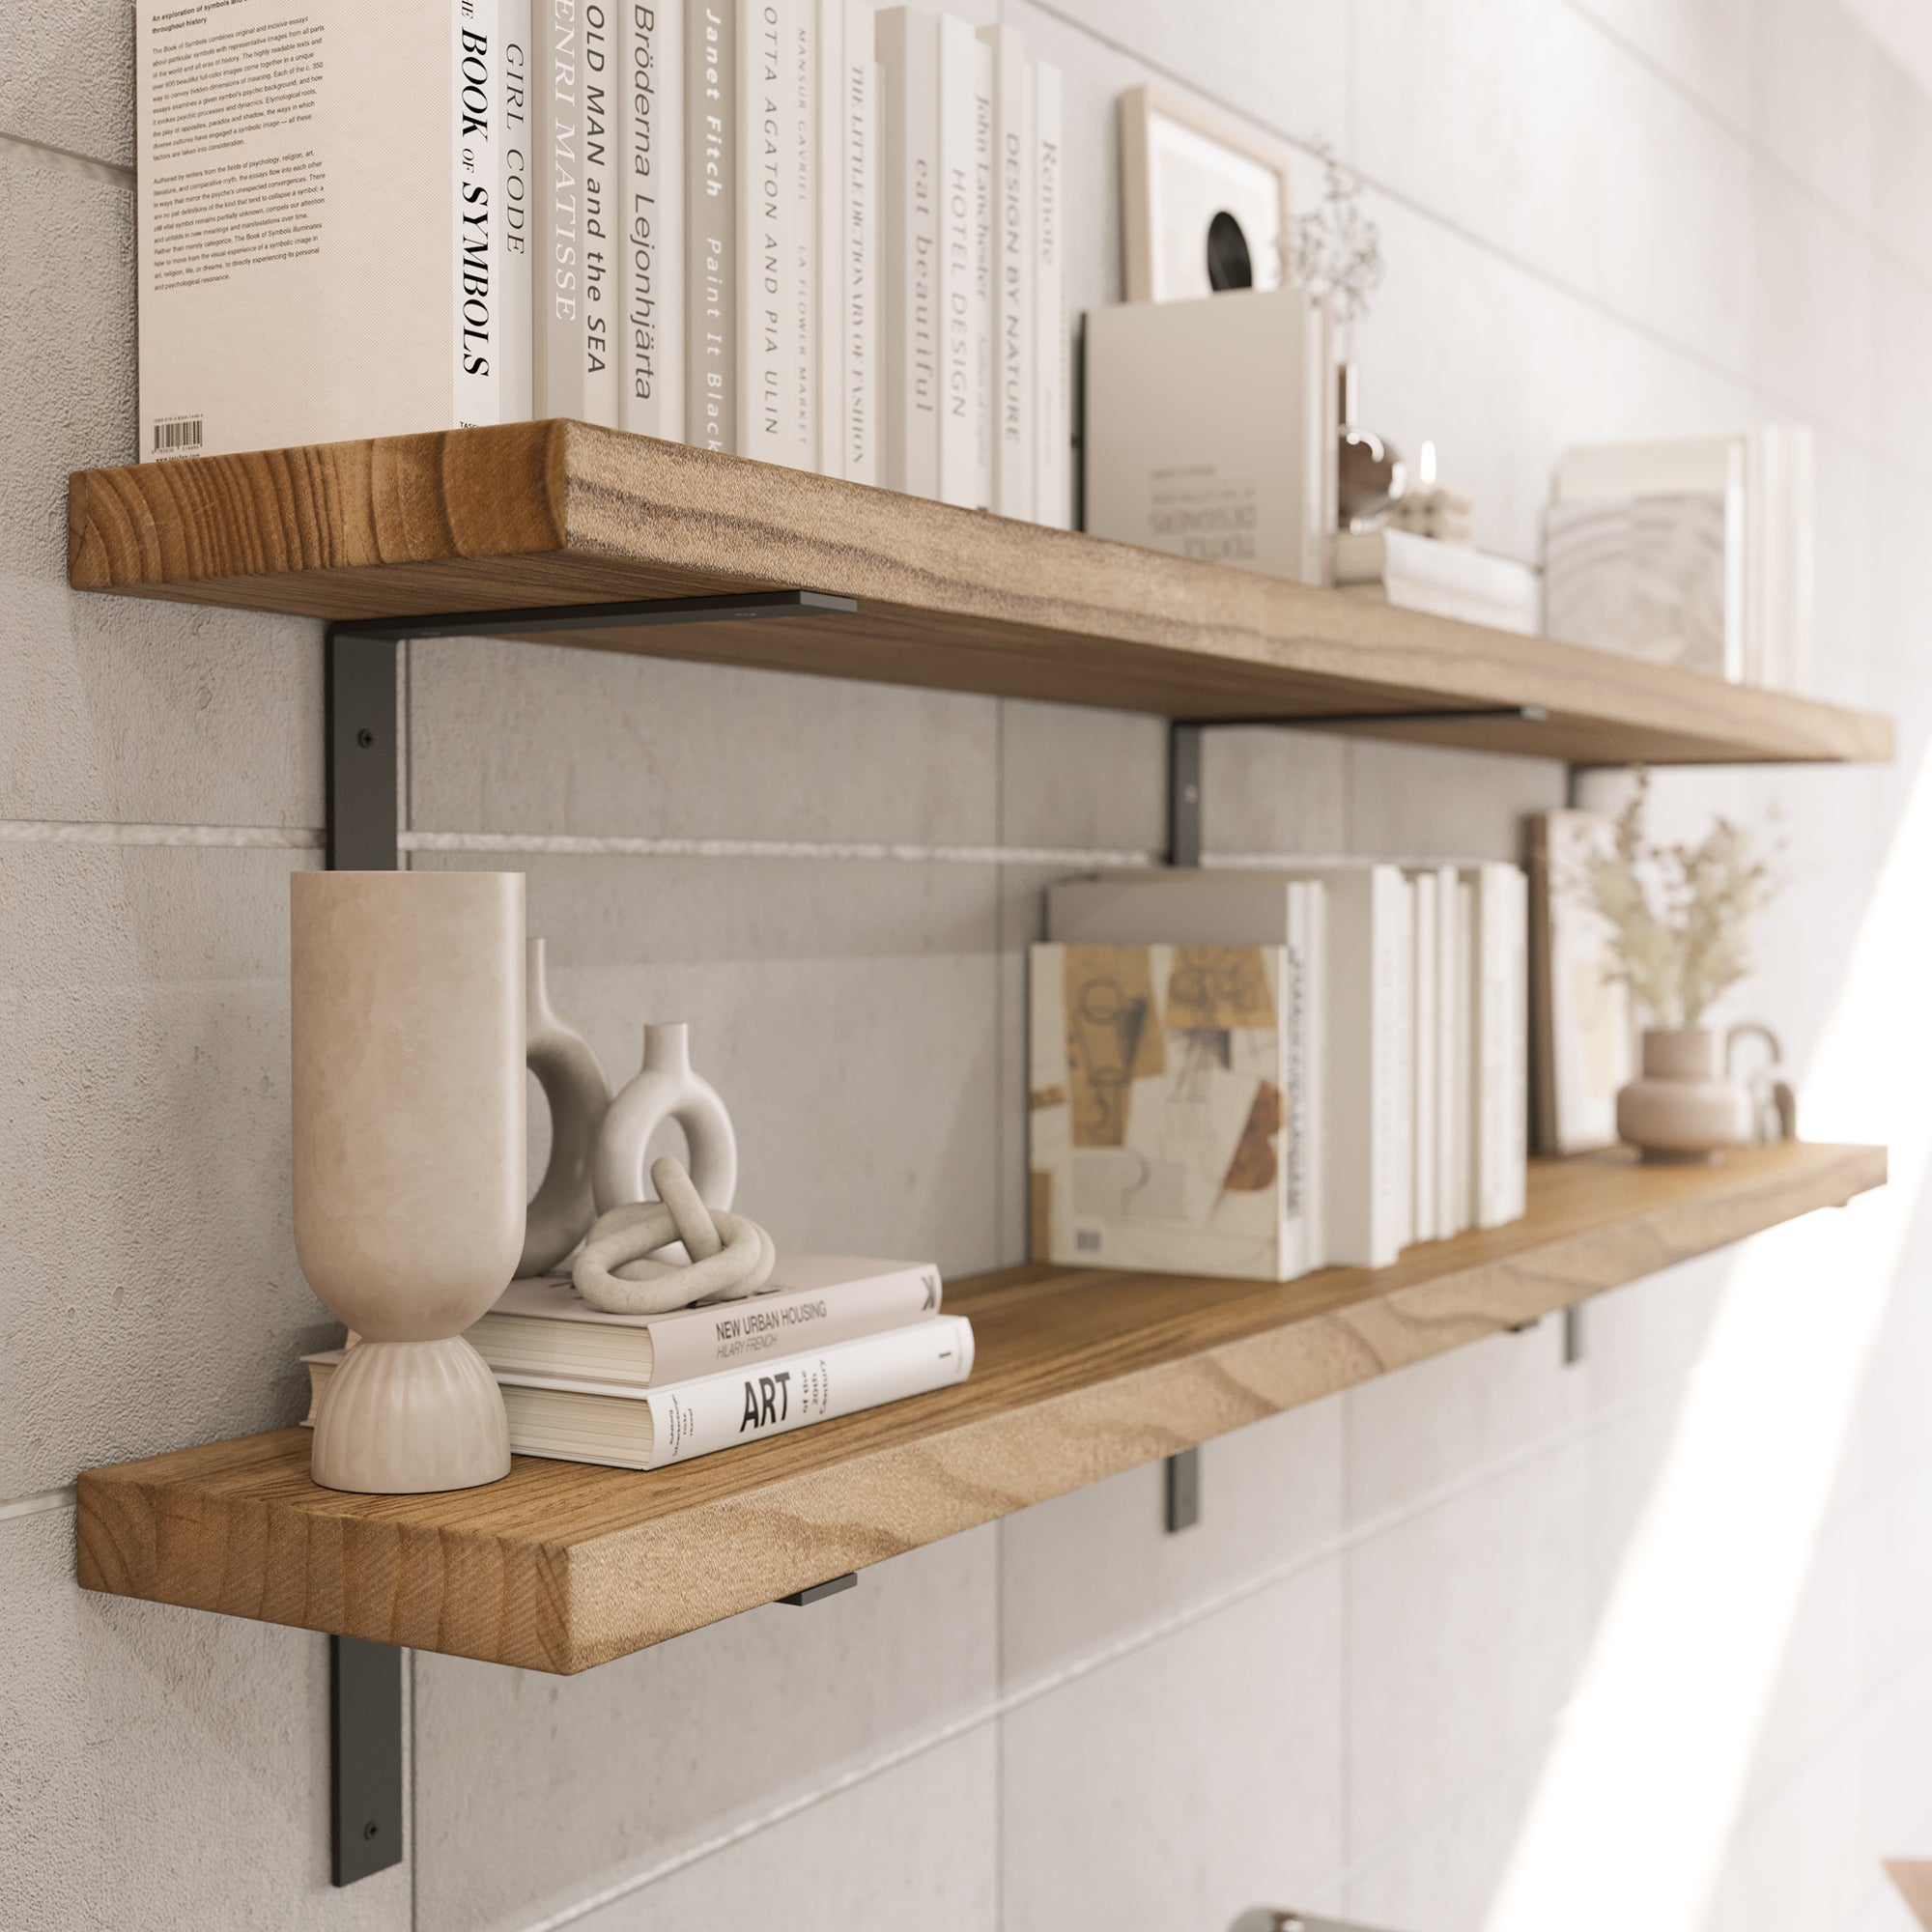 The image shows two wooden wall shelves with black metal brackets. They hold books and decor items like vases and artwork, creating a stylish, organized space against a light gray wall.